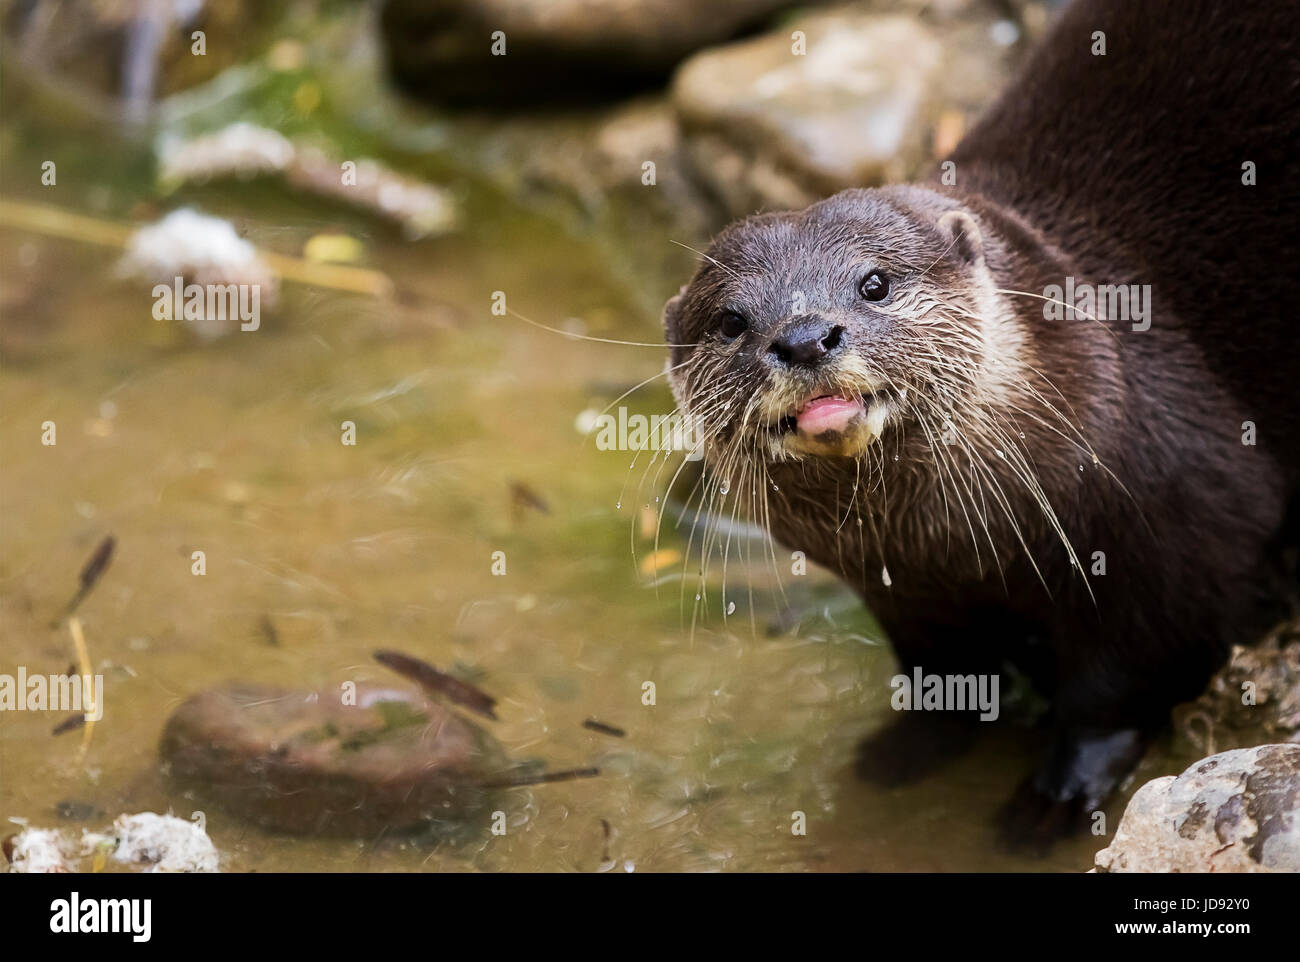 A European Otter at the River Bank Stock Photo